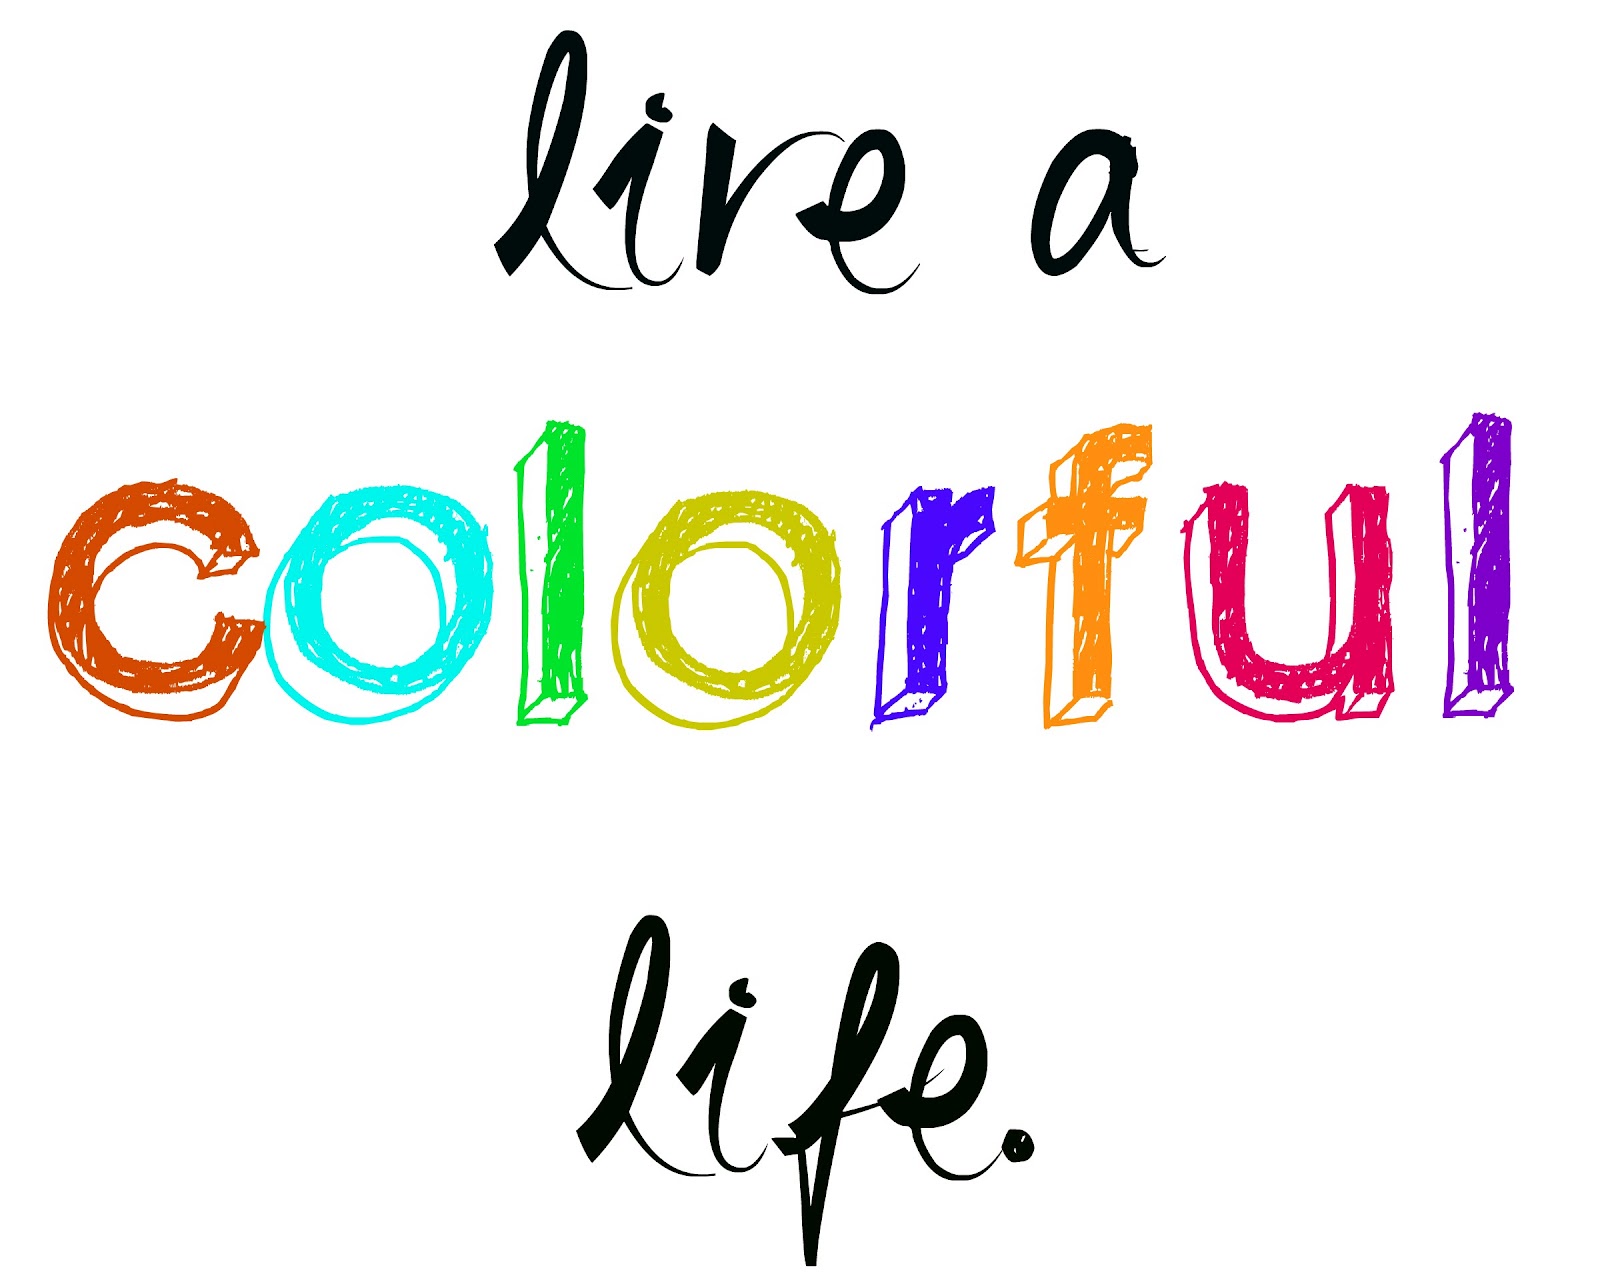 Colorful life. Life Color. Color your Life. Life is colorful.